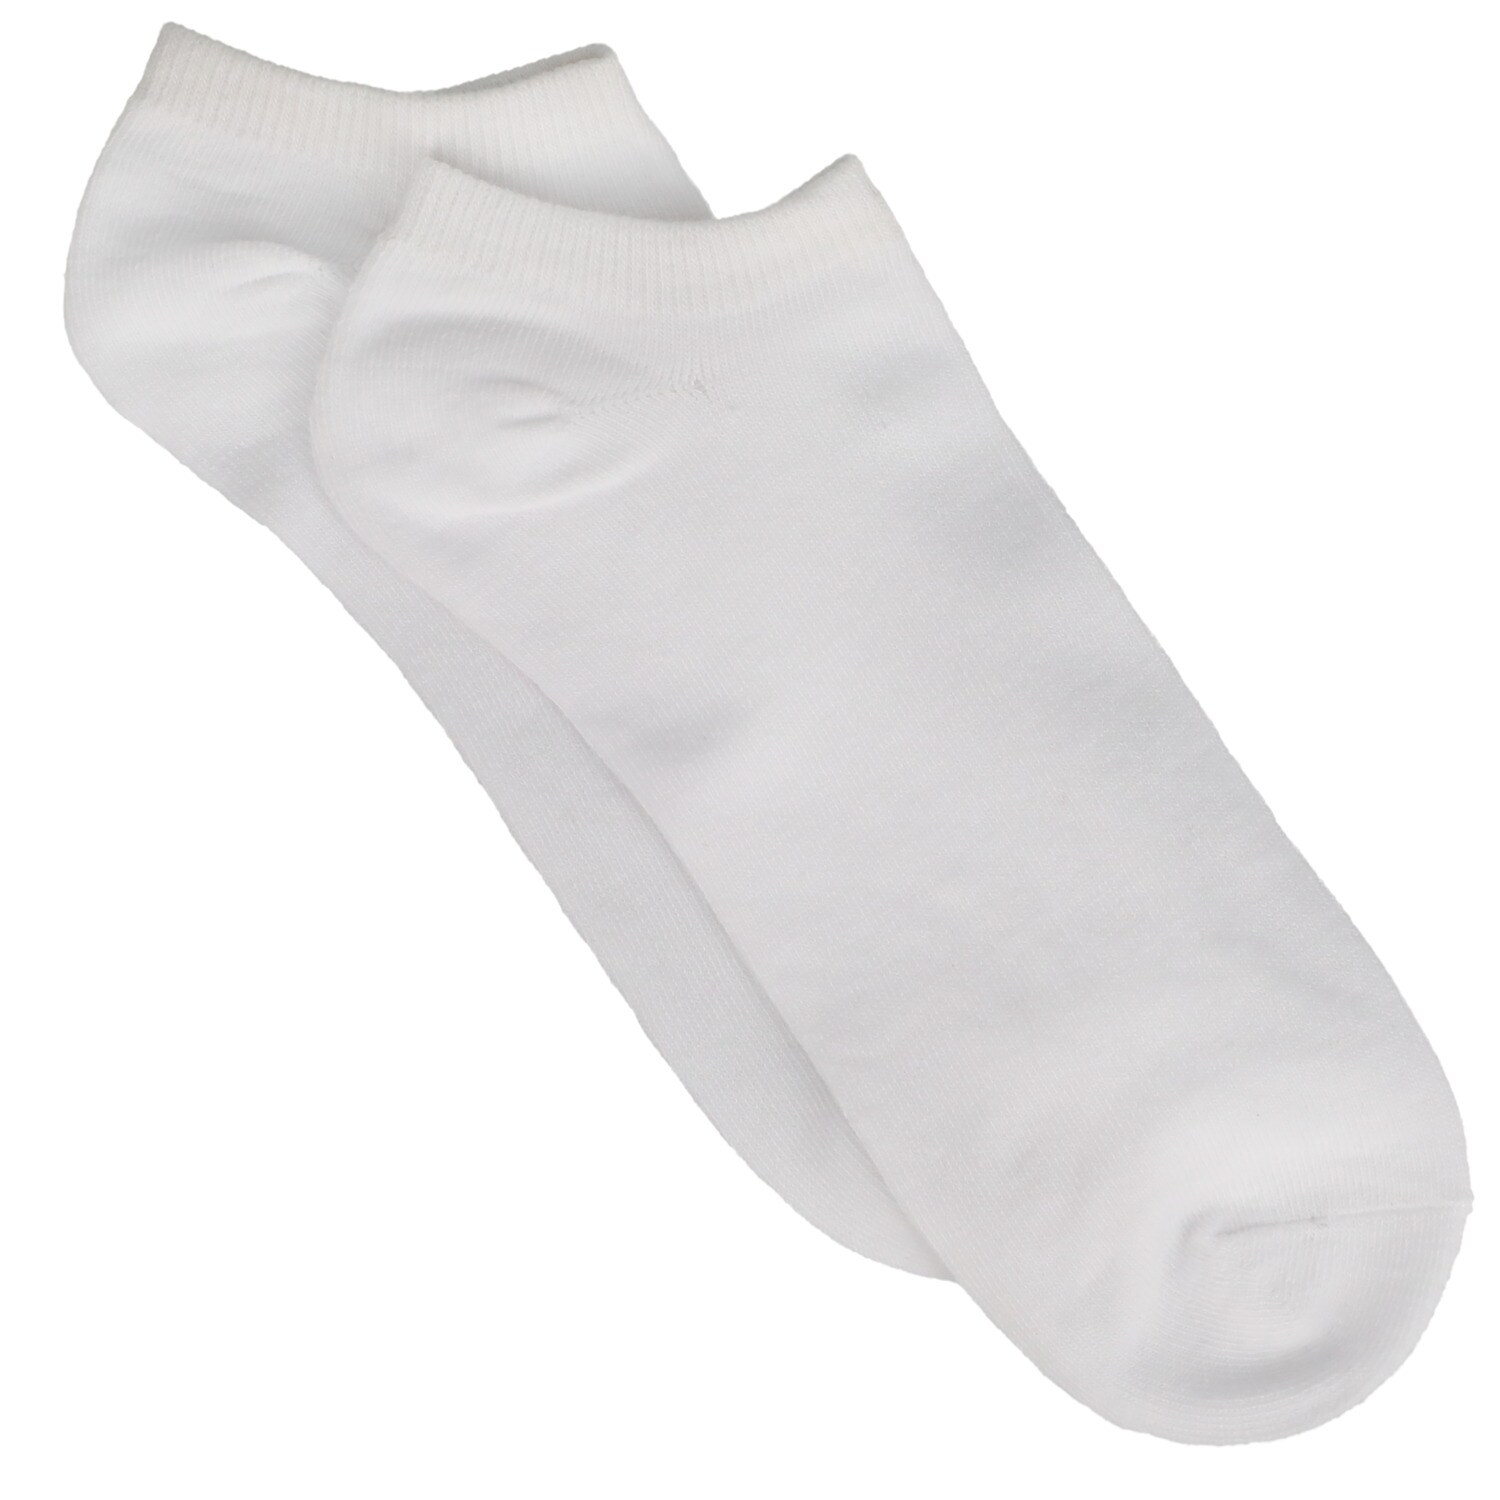 Pro Player Big Girls Proplayer Womens 10 Pack No Show Socks 